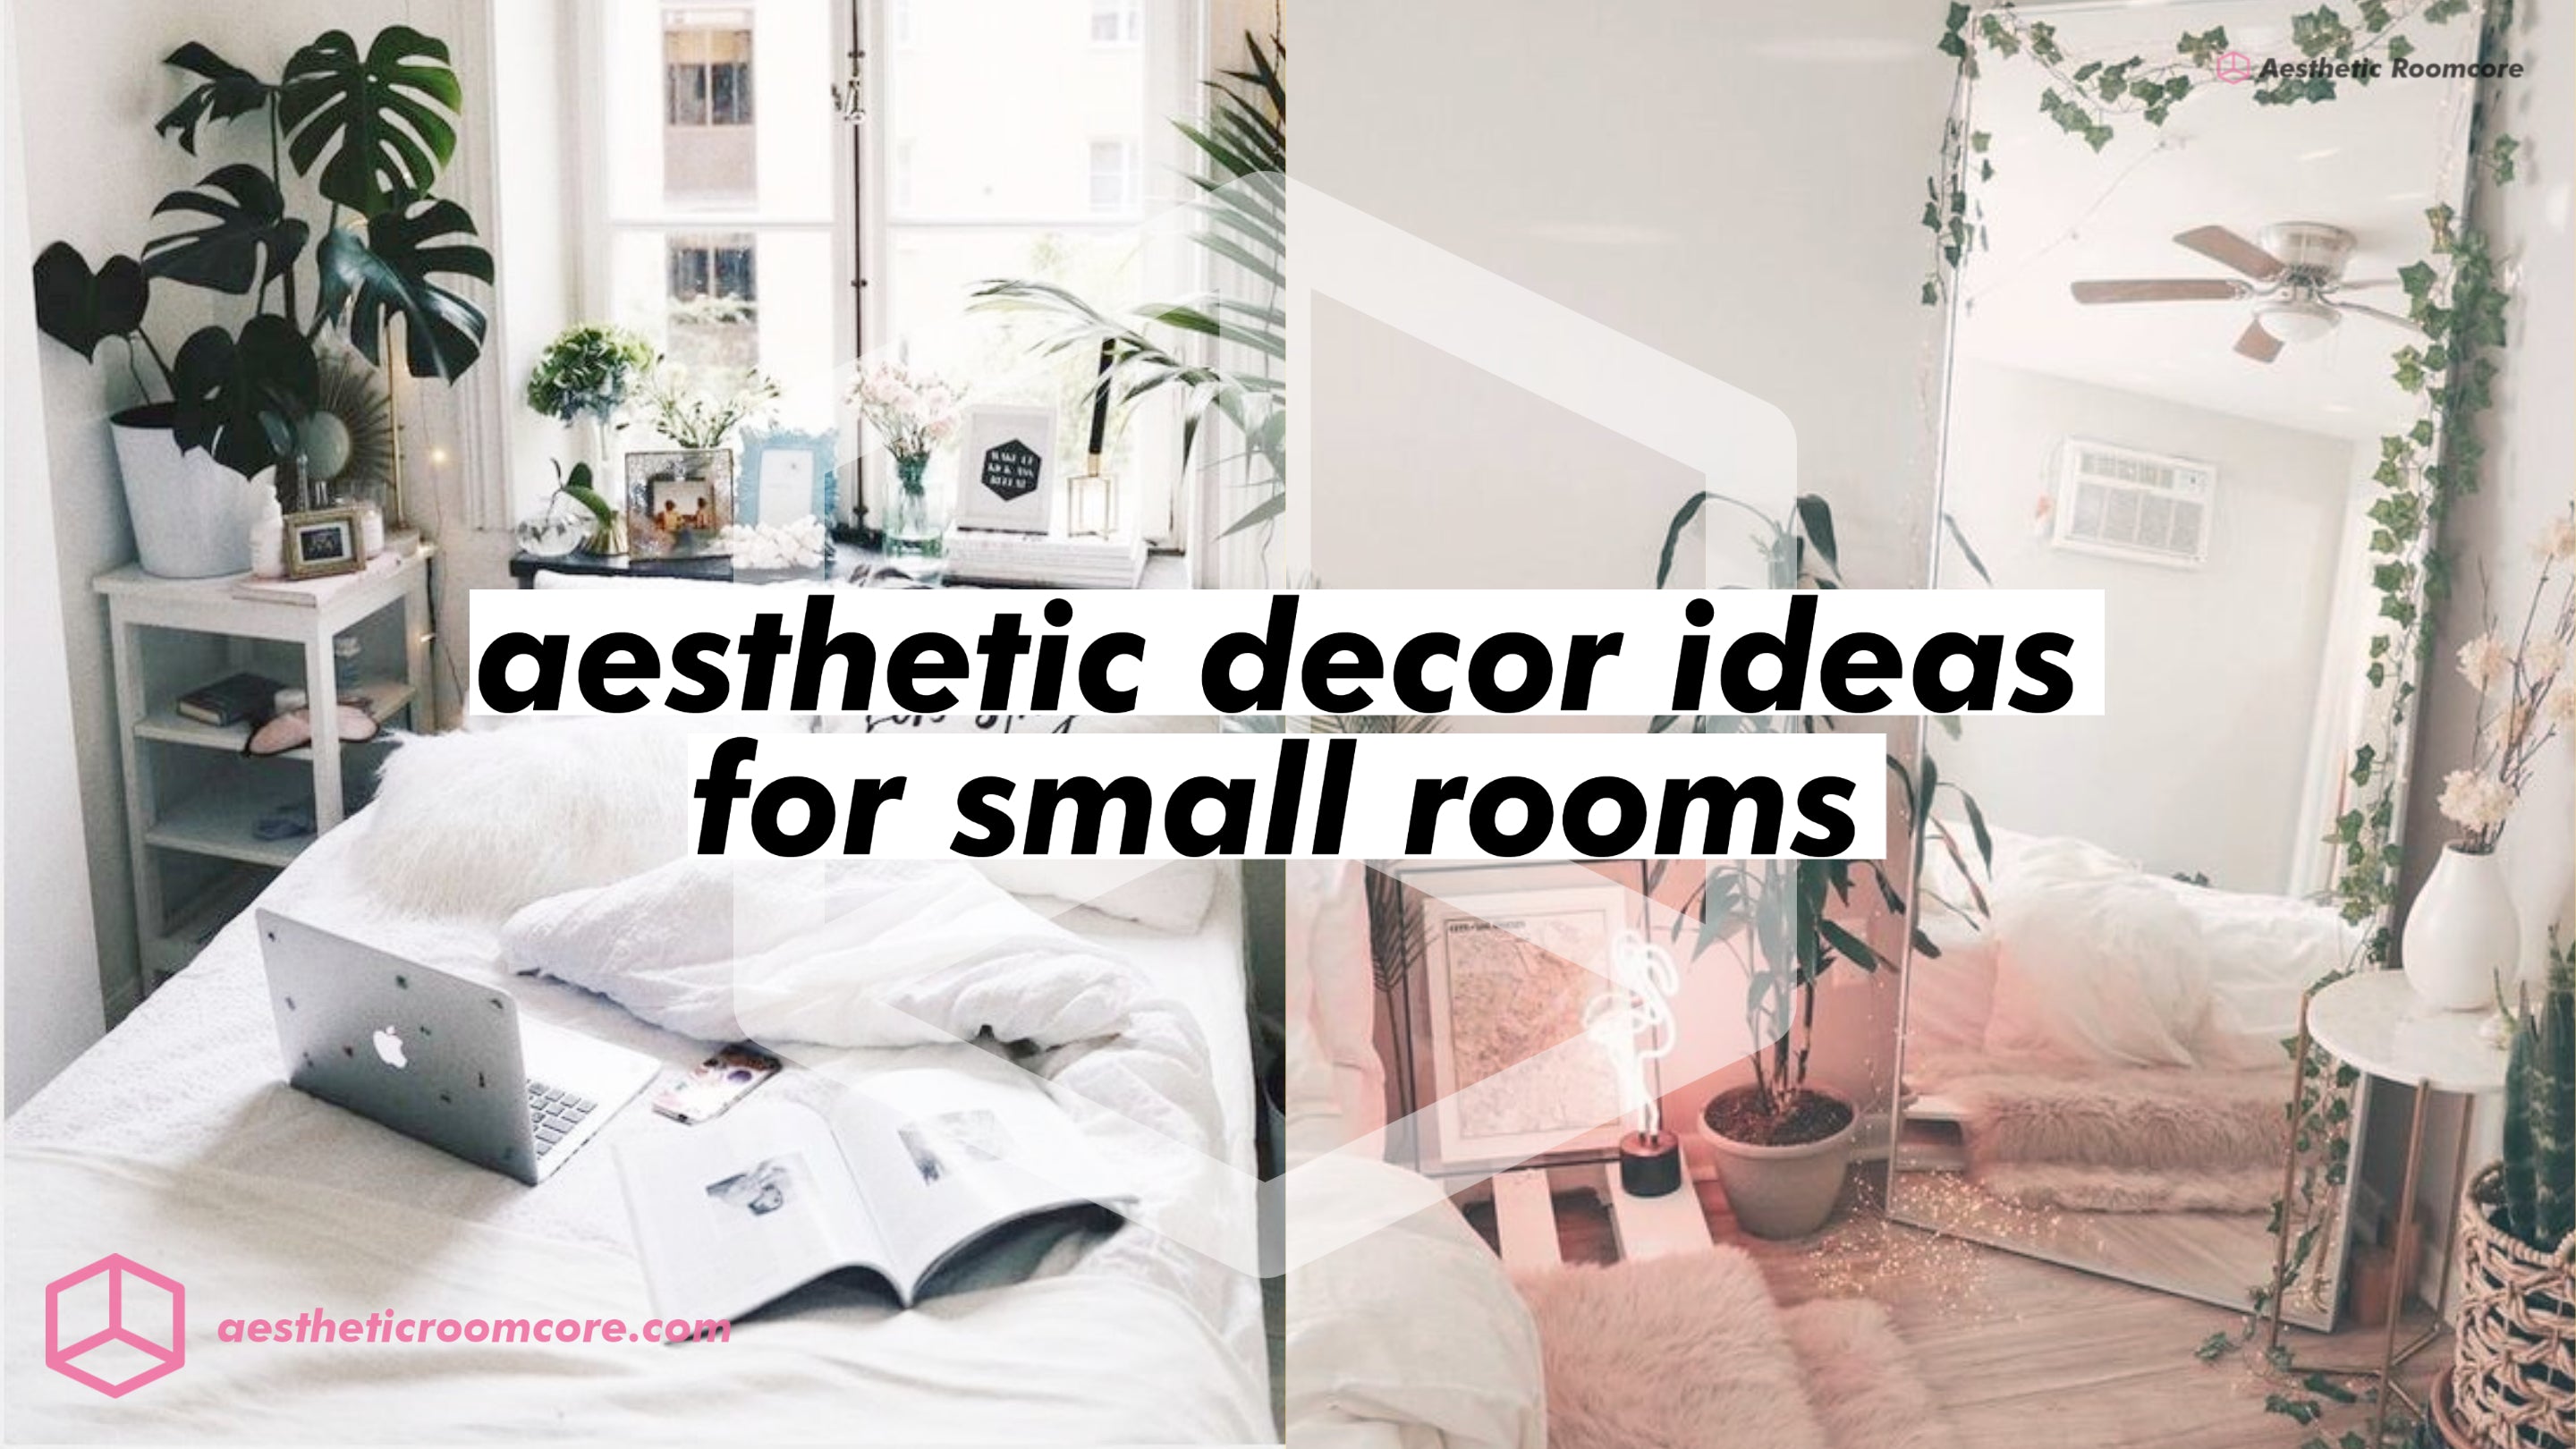 Aesthetic Room Ideas For Small Rooms | Small Room Decor Ideas